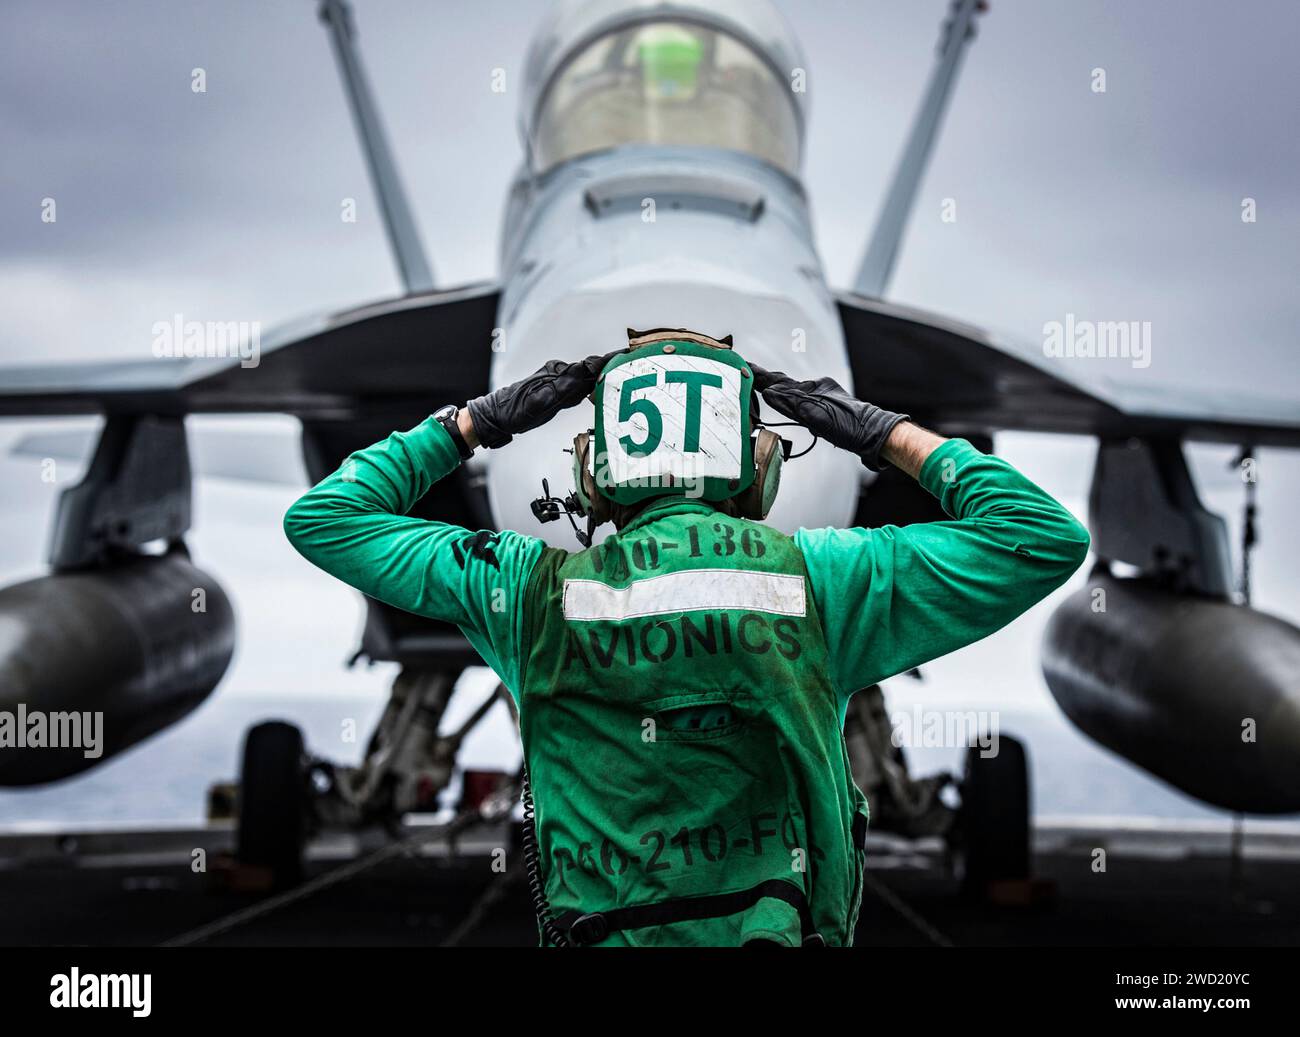 U.S. Navy Aviation Electronics Technician signals to the crew of an EA-18G Growler. Stock Photo